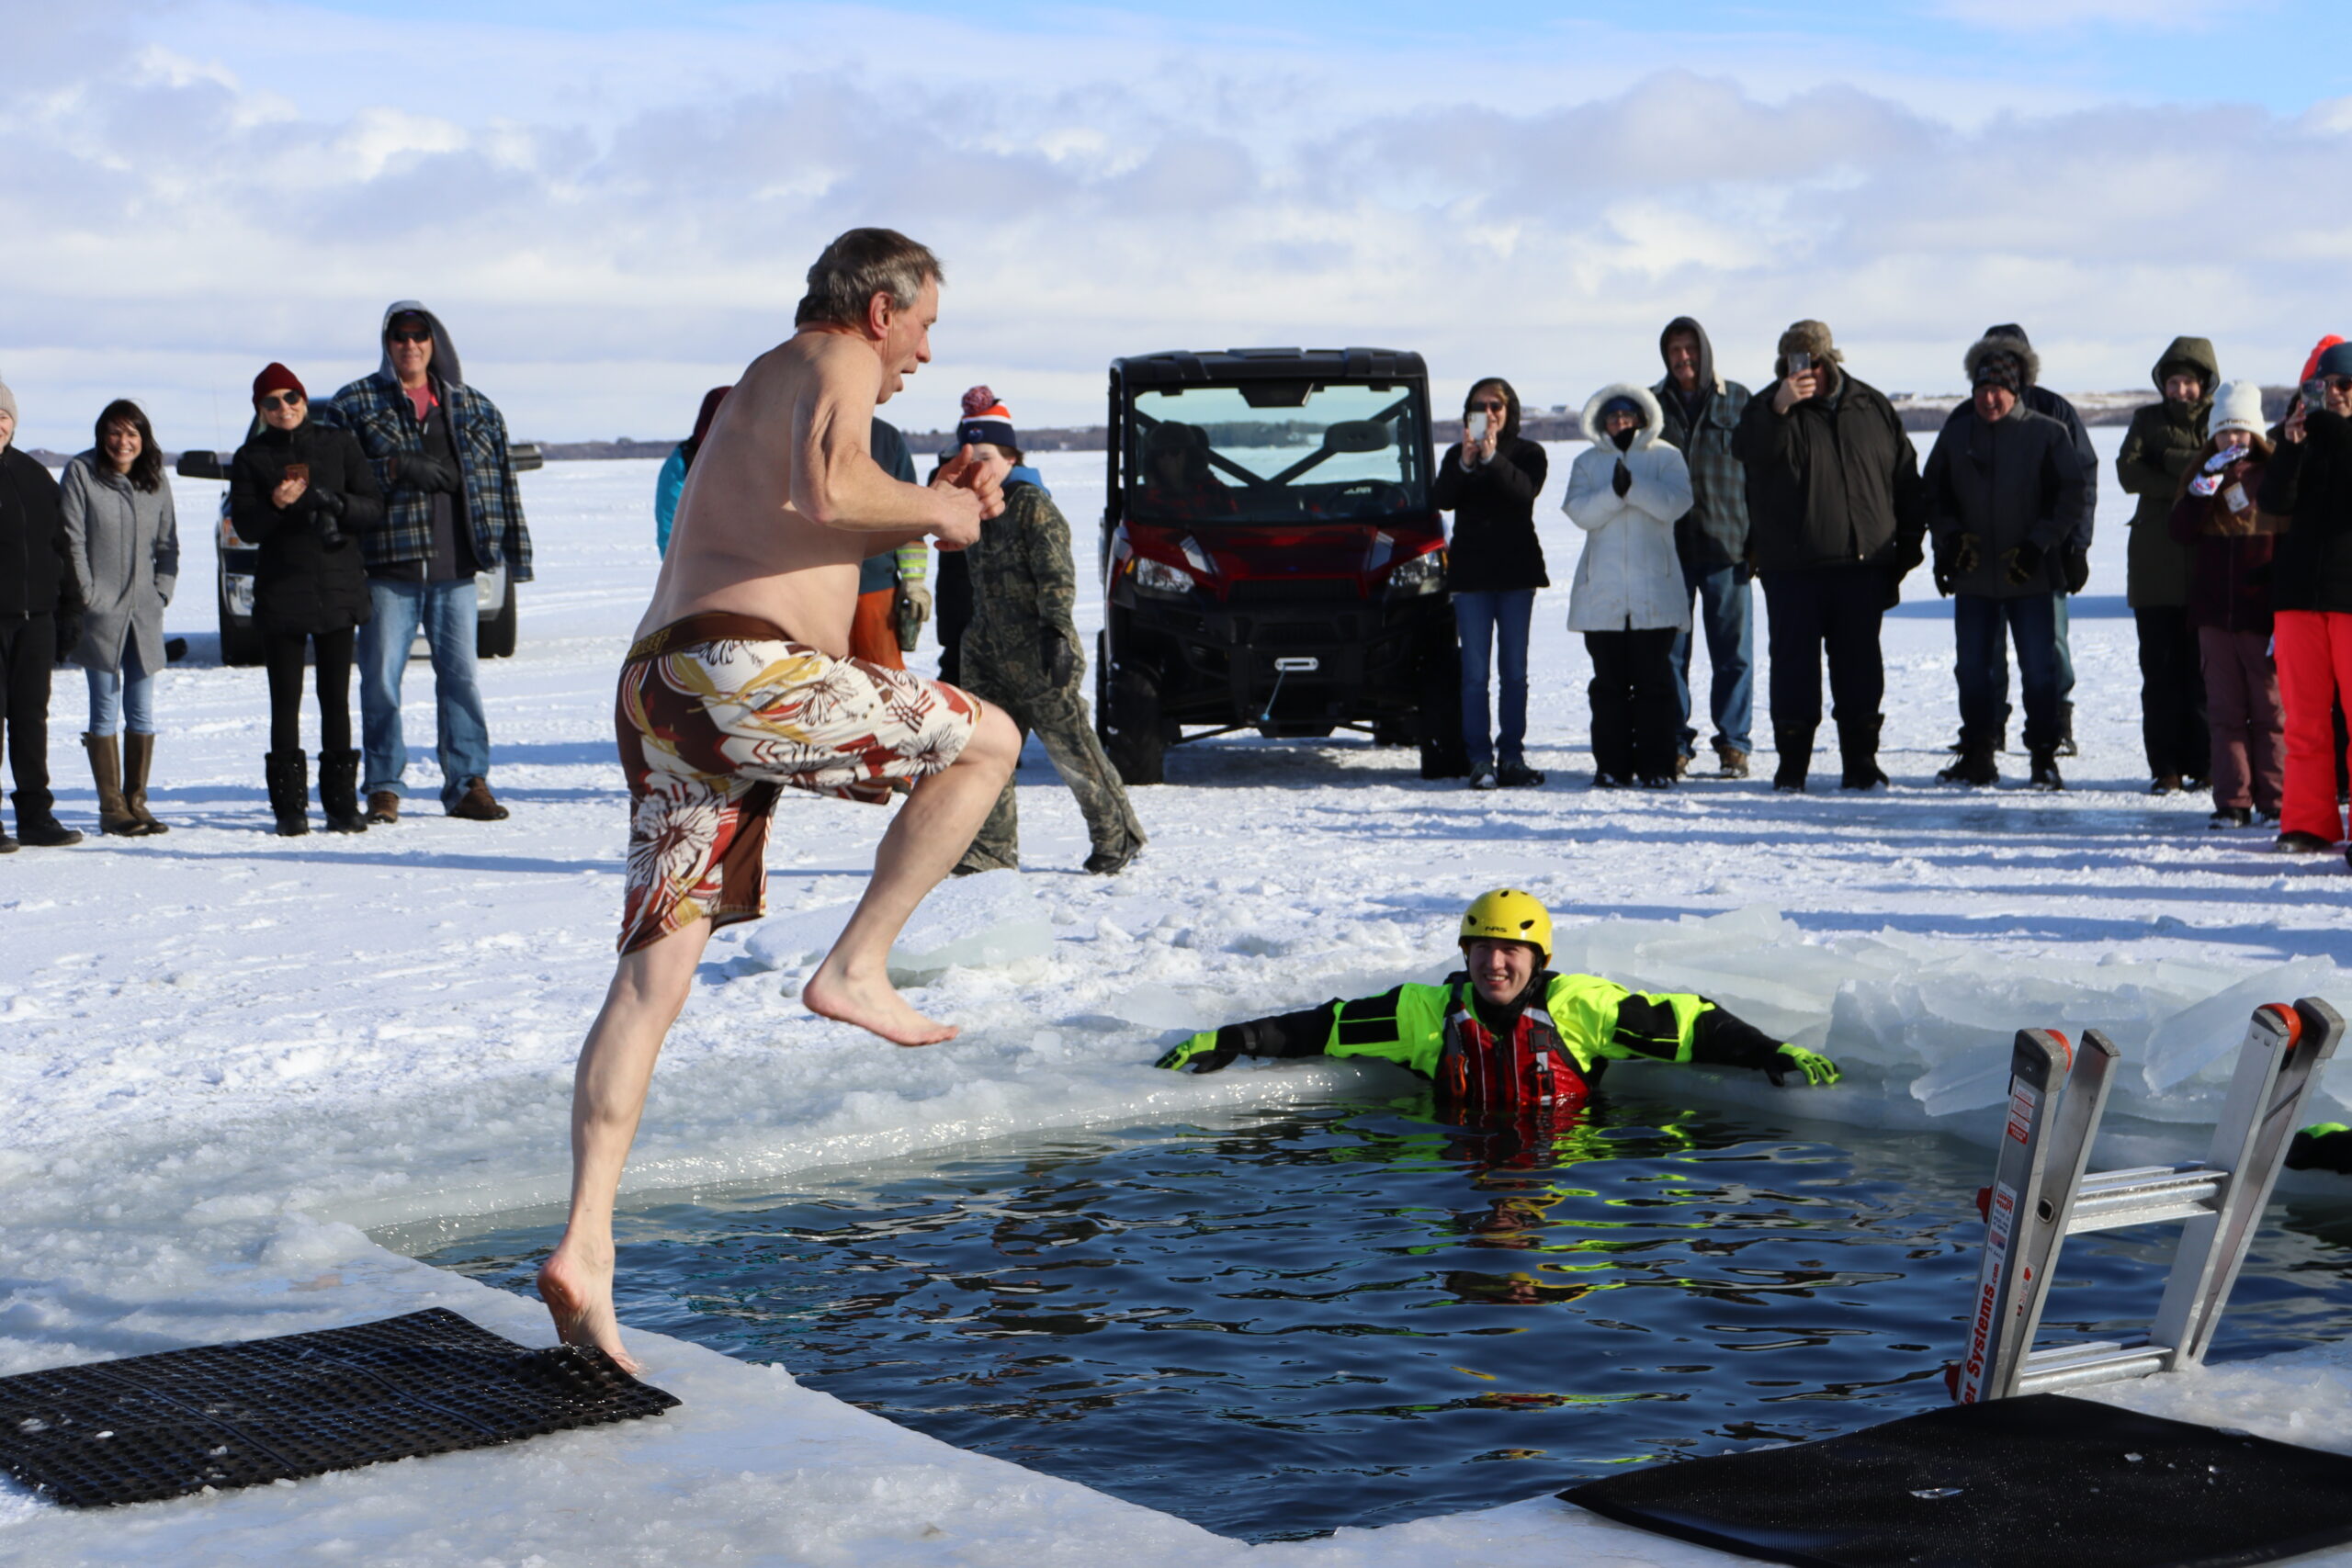 Kevin MacDonald took the plunge last year and this year is leading the charge on the this important fundraiser!